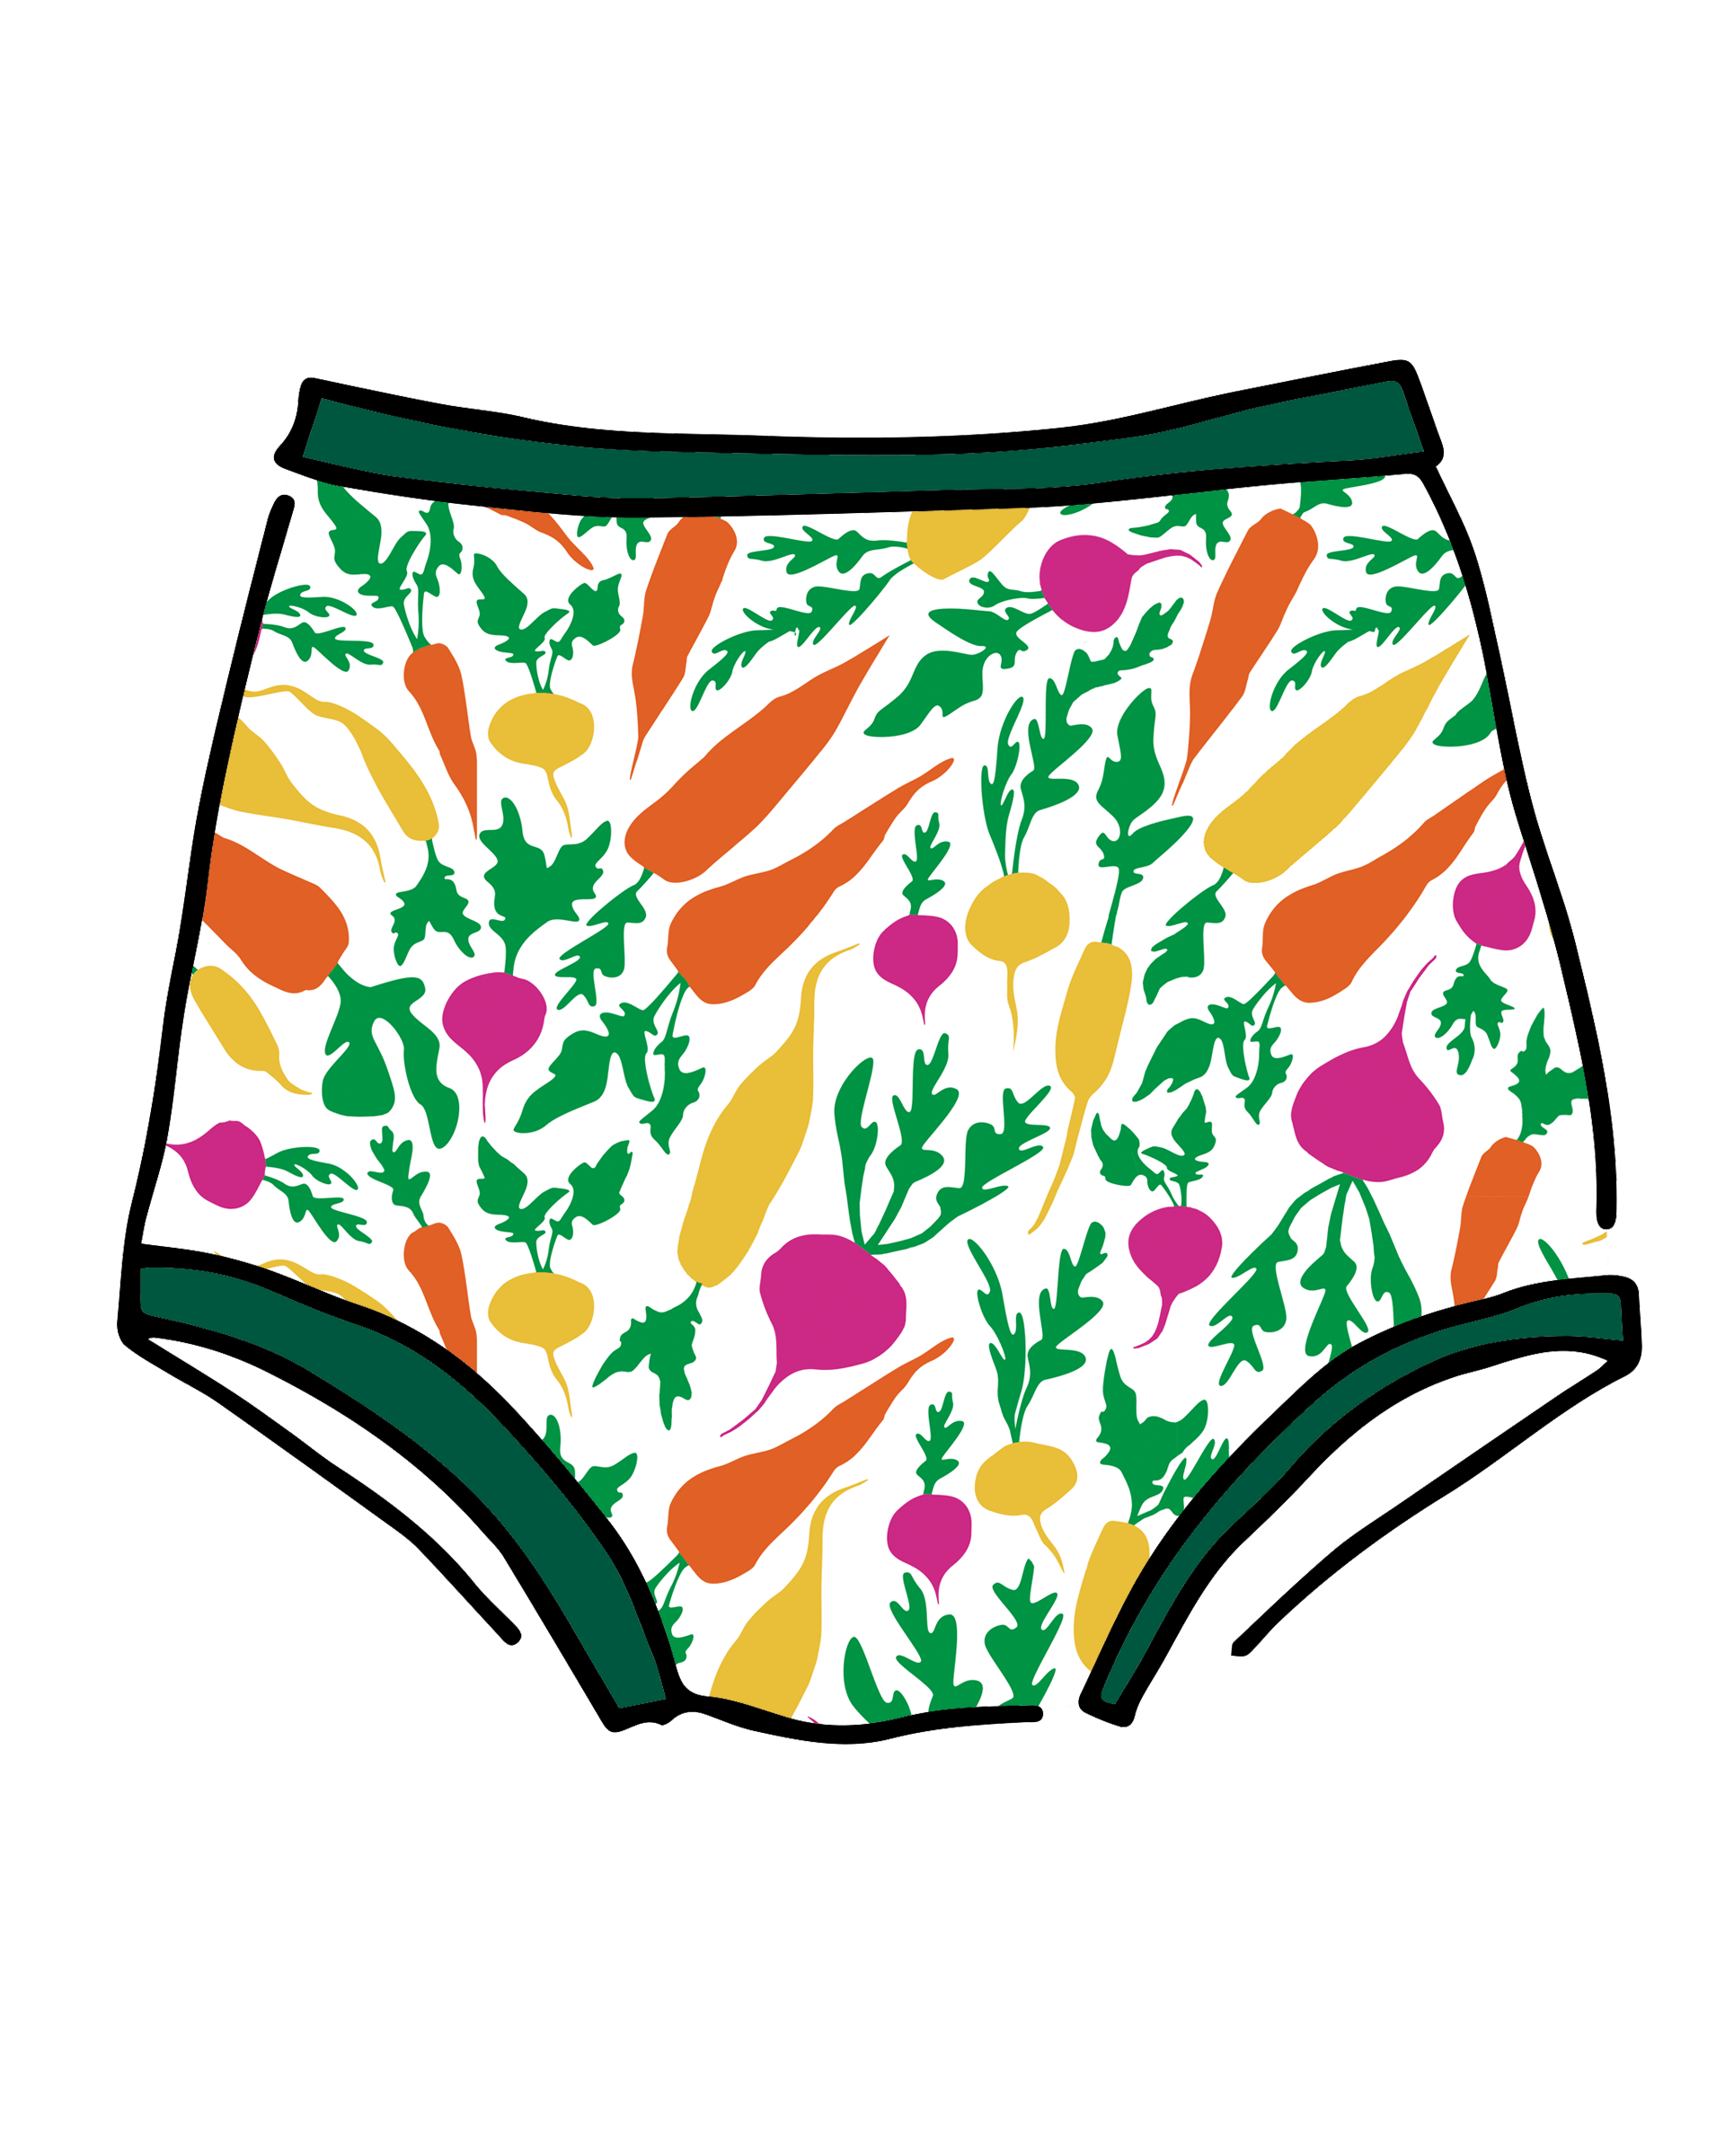 Drawing of Thunderpants Sky Rise style underwear in Root Veggies print.